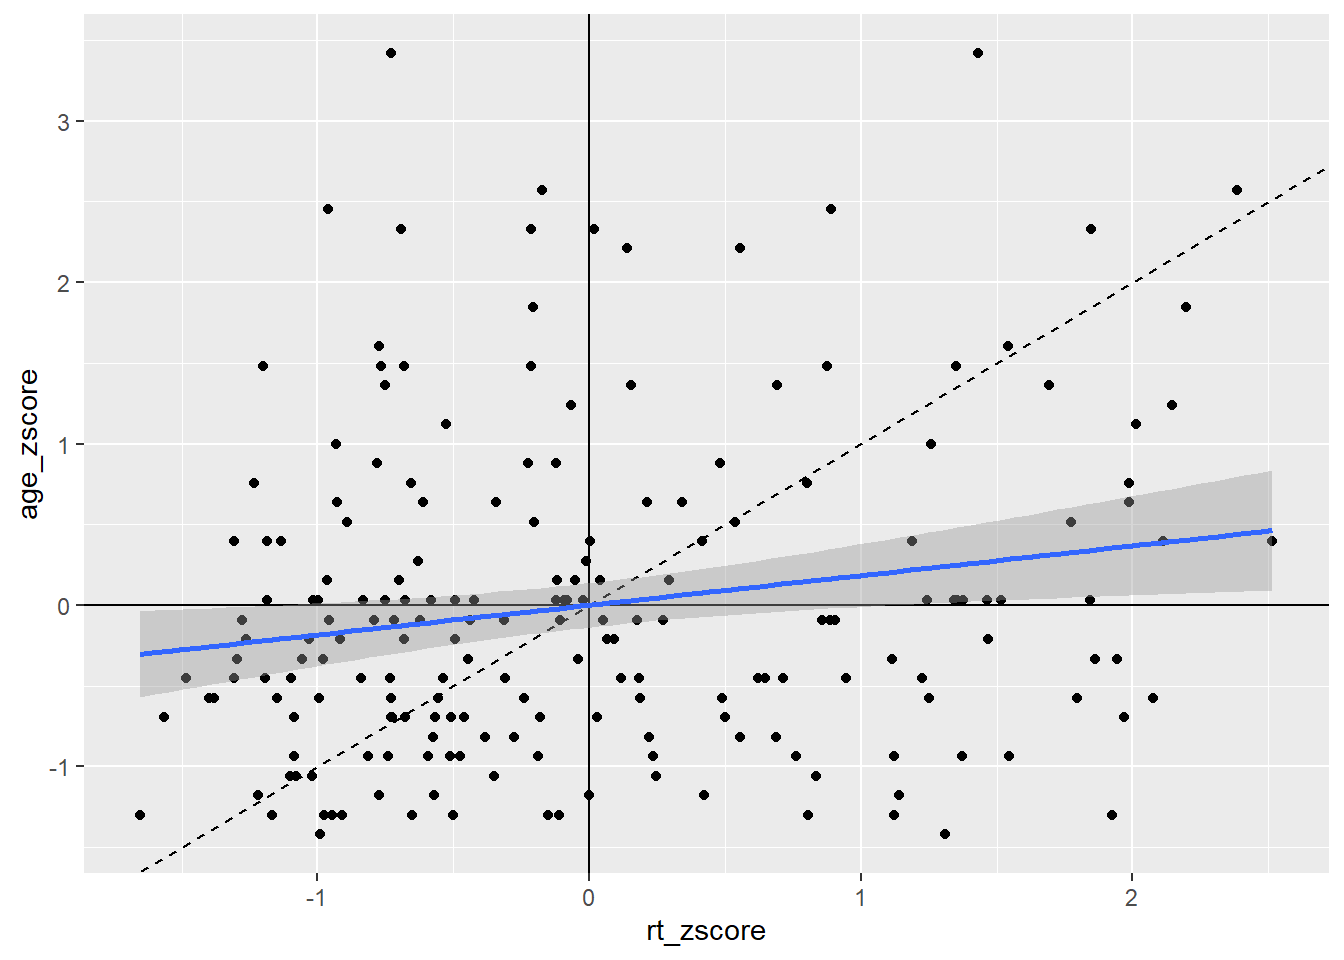 Line of best fit (blue solid line) for reaction time versus age with true diagonal shown (black line dashed).